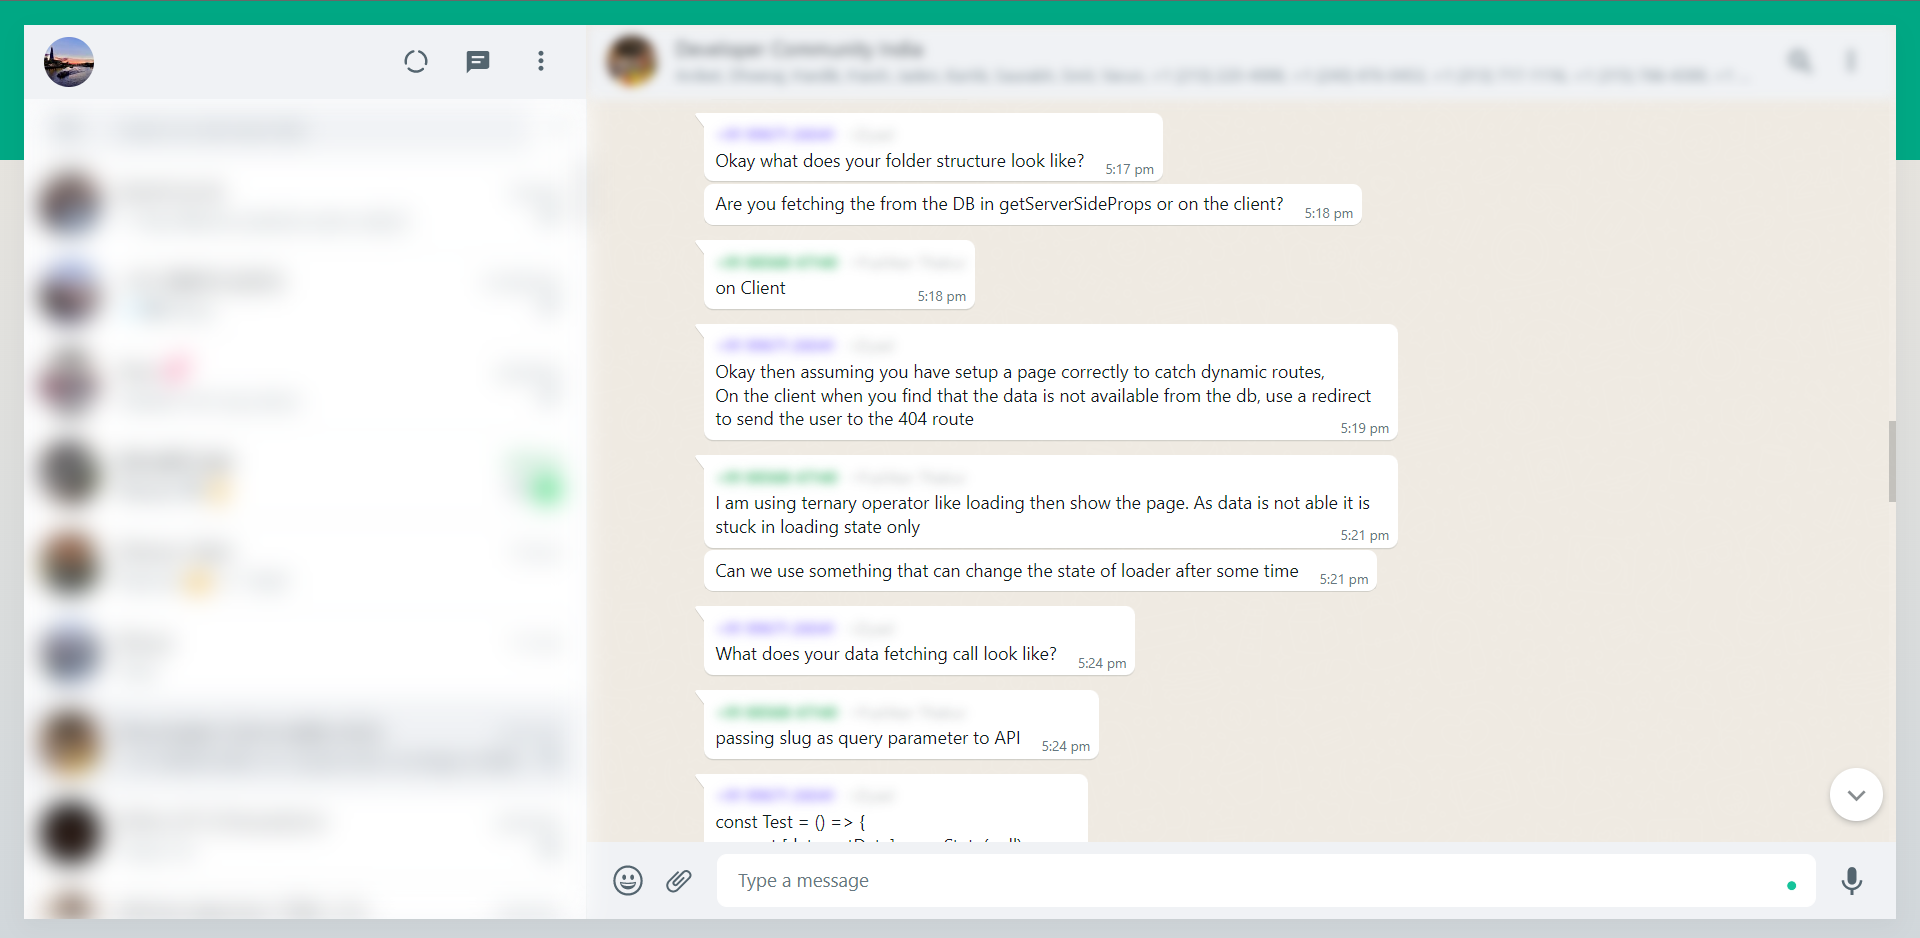 A snapshot of blurrit extension in action with WhatsApp Web in light mode